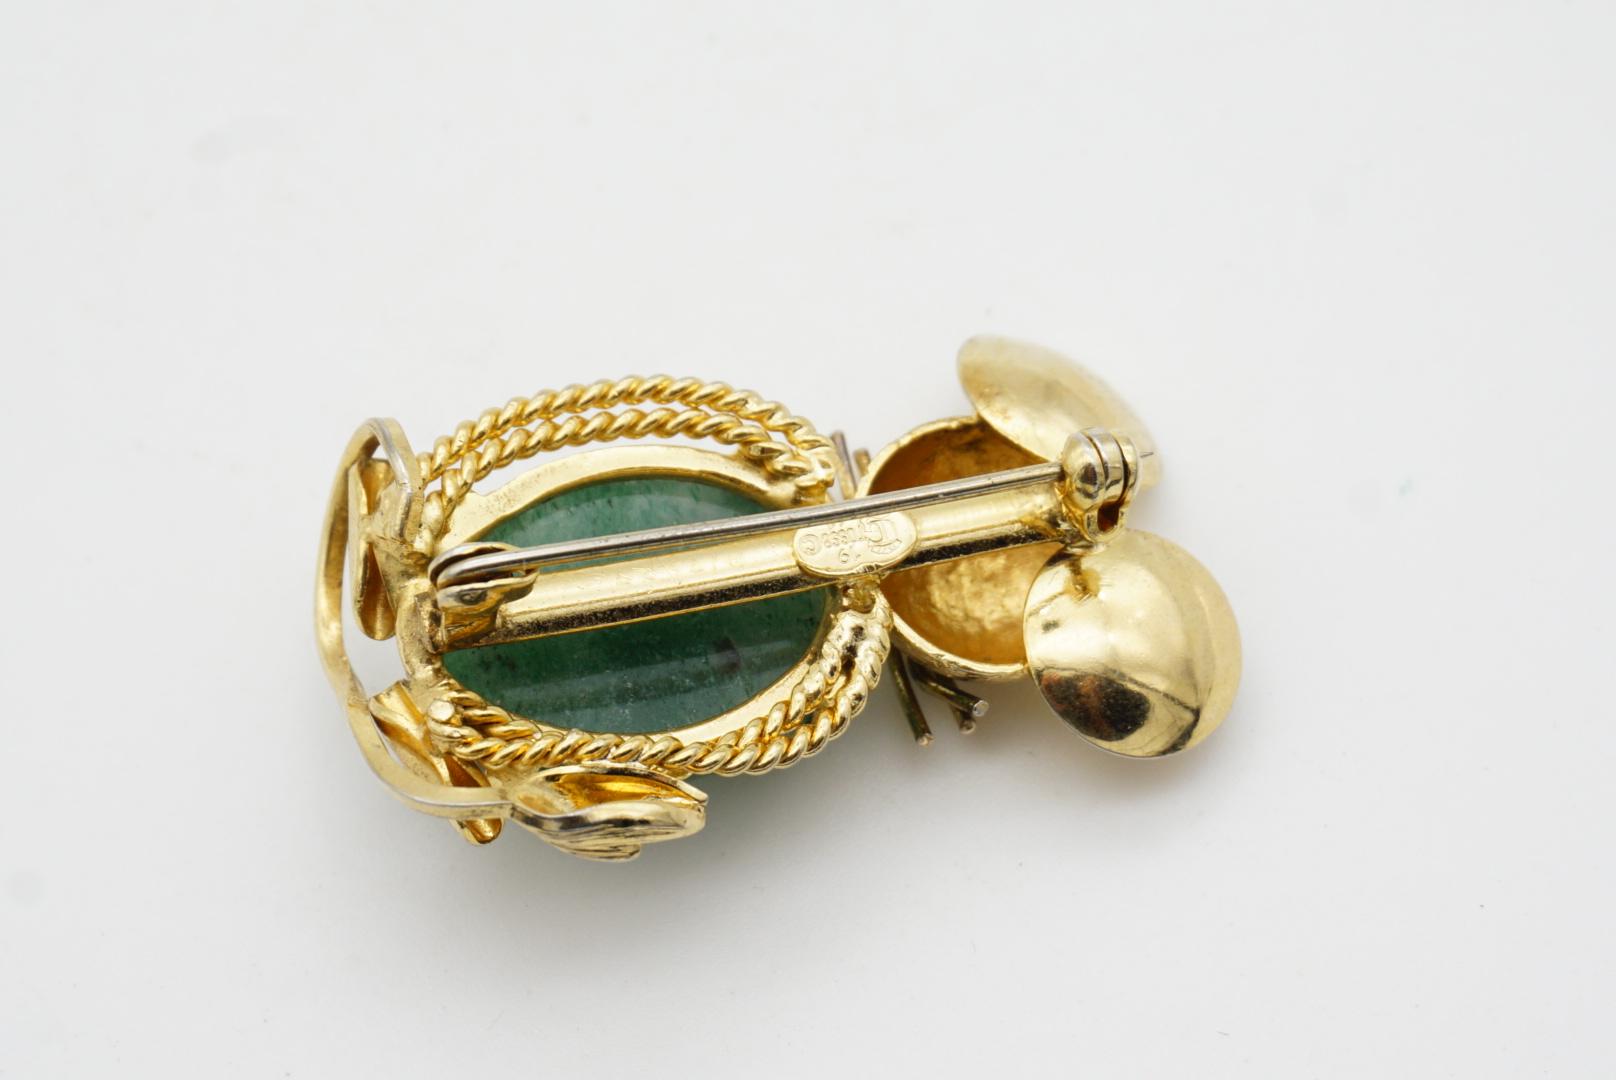 Christian Dior GROSSE 1961 Vintage Vivid Green Emerald Mickey Mouse Gold Brooch For Sale 5